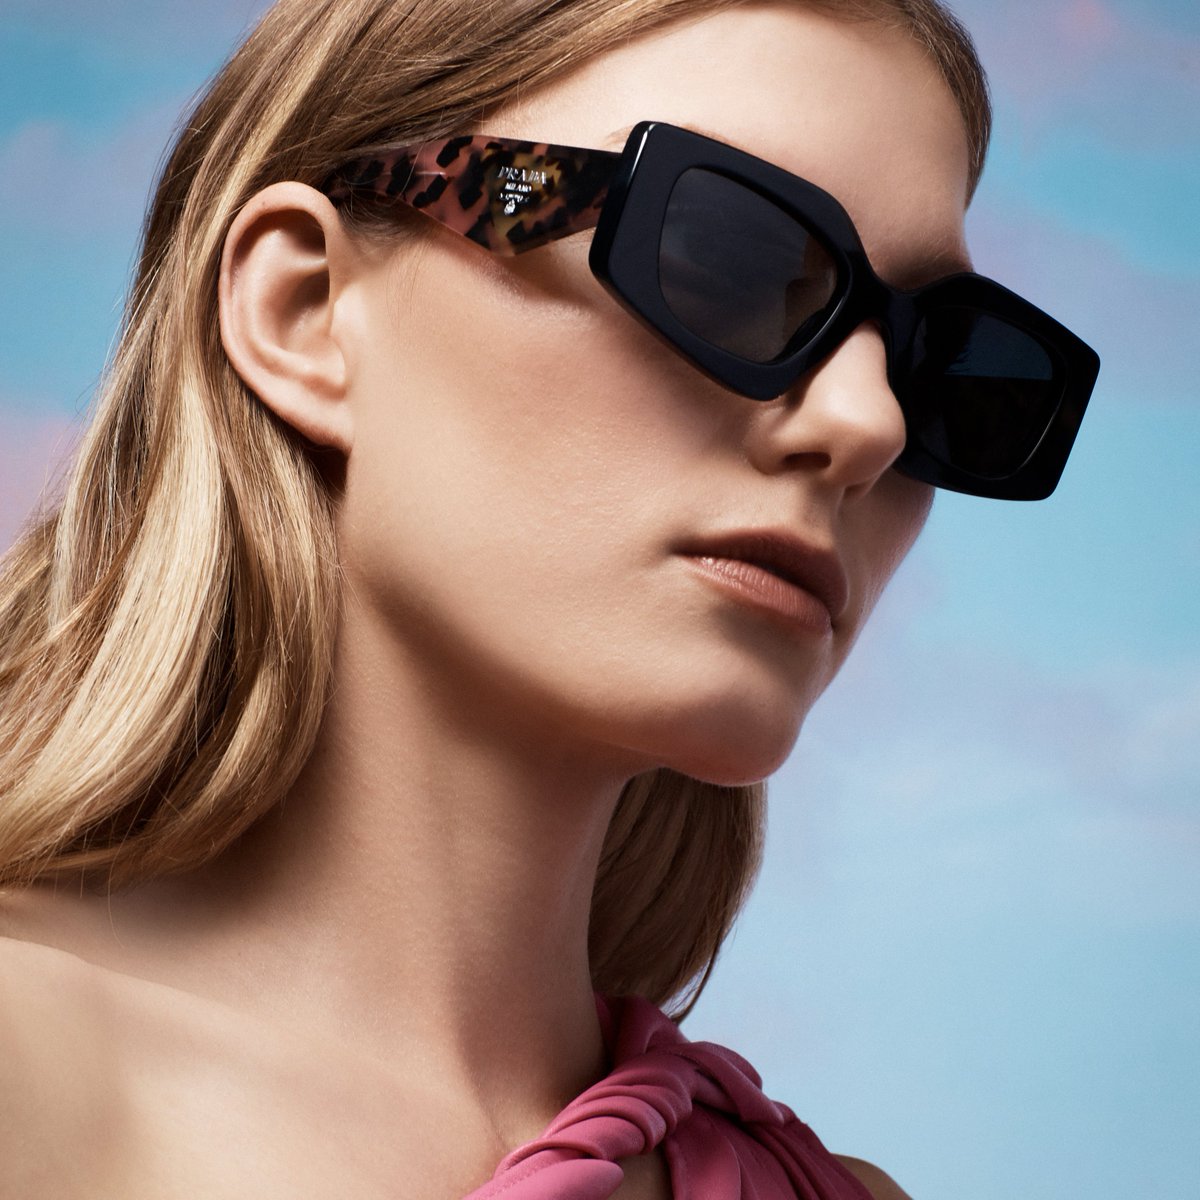 Looking at our fall calendars like… Need these @prada sunglasses for every vineyard visit and outdoor brunch. Shop now: saks.shop/PradaSunglasses